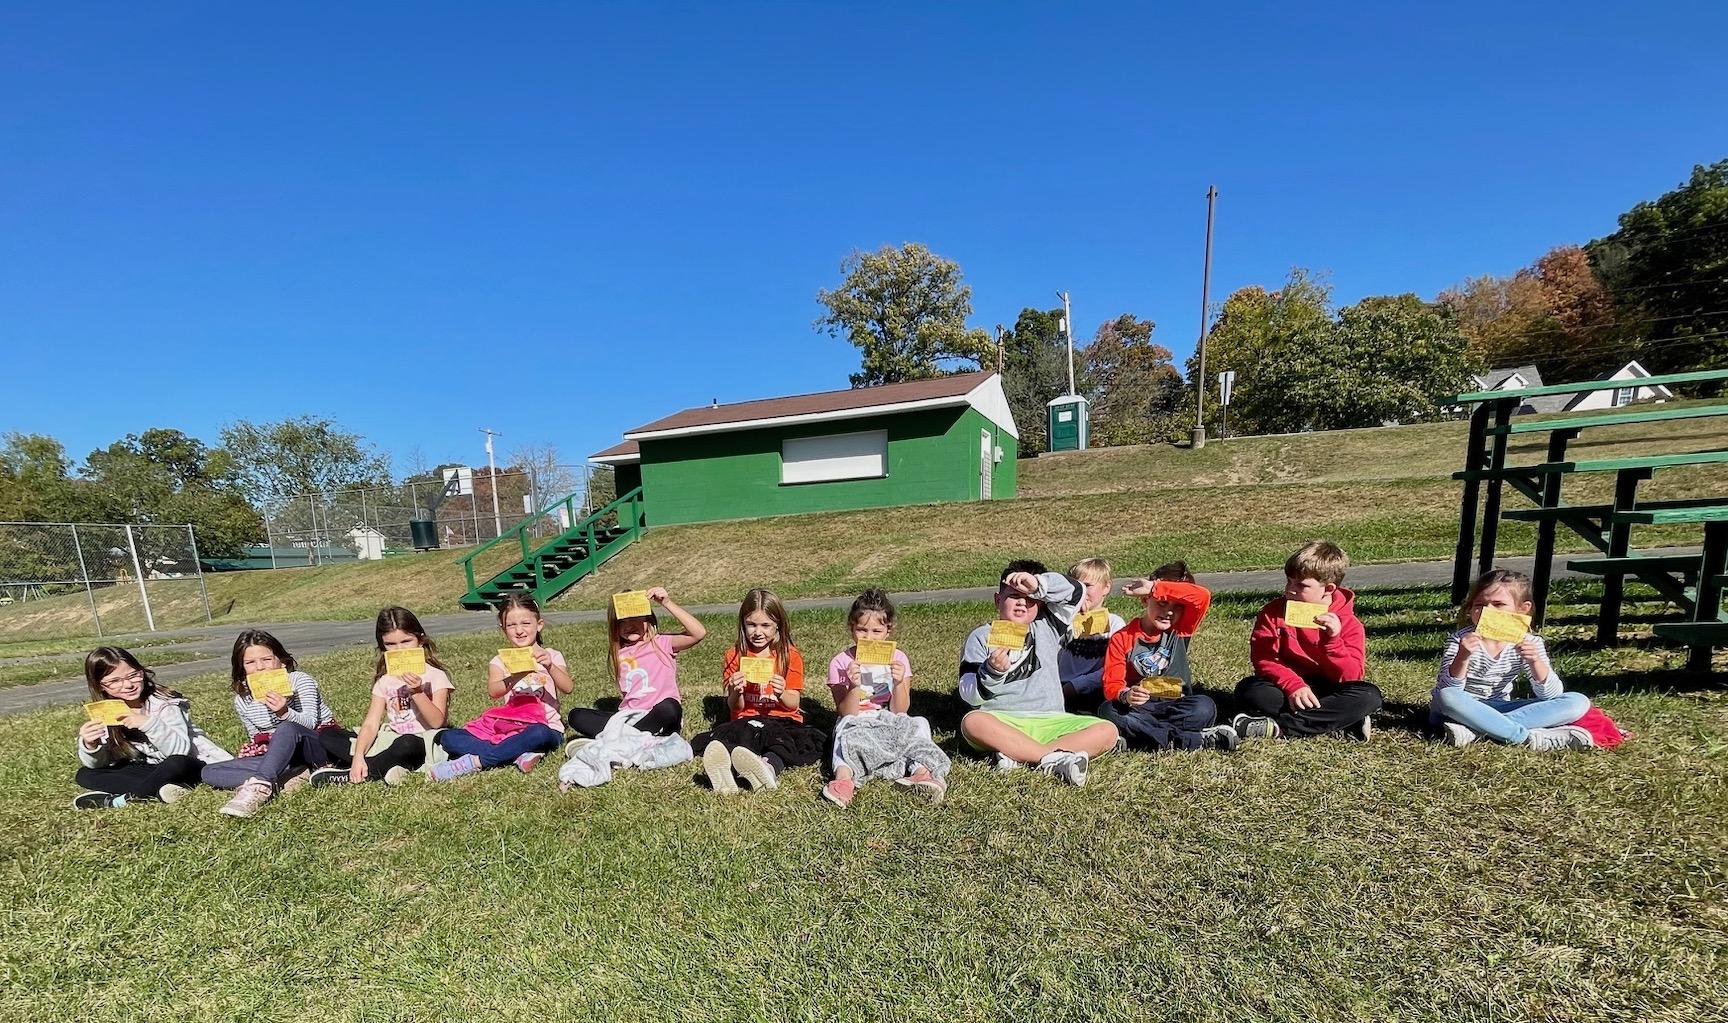 Mrs. Giovannitti’s 1st-grade class rests after walking laps on the track